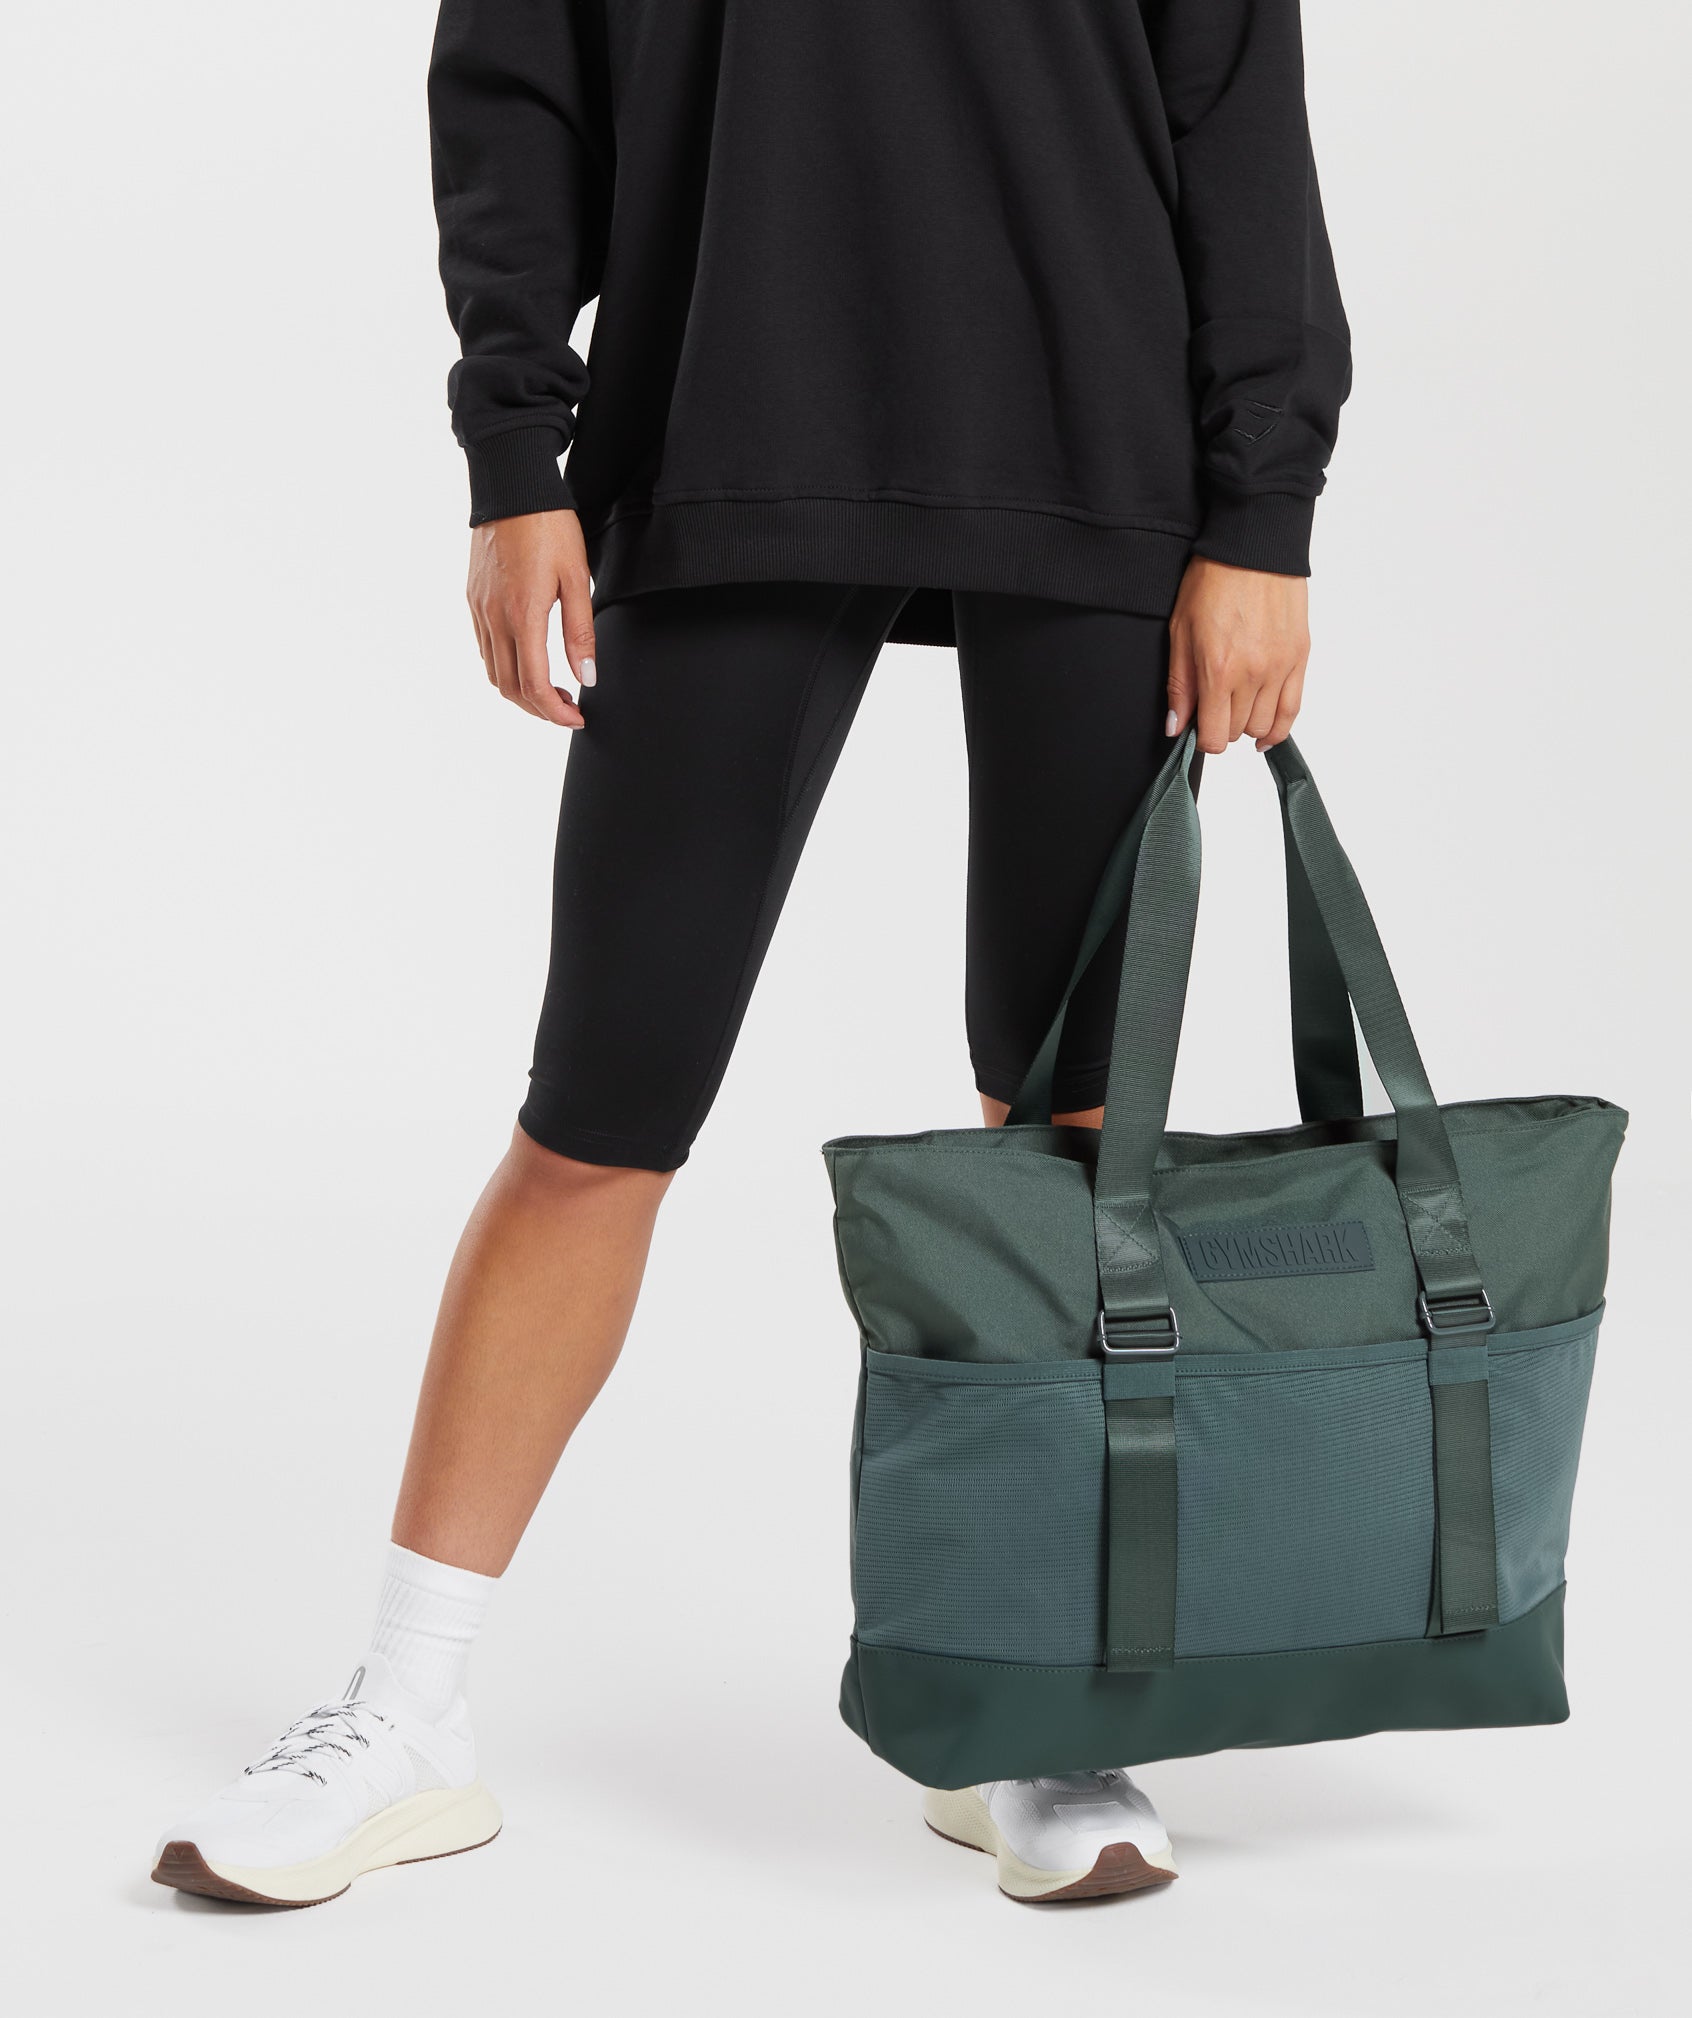 Everyday Tote in Fog  Green - view 2